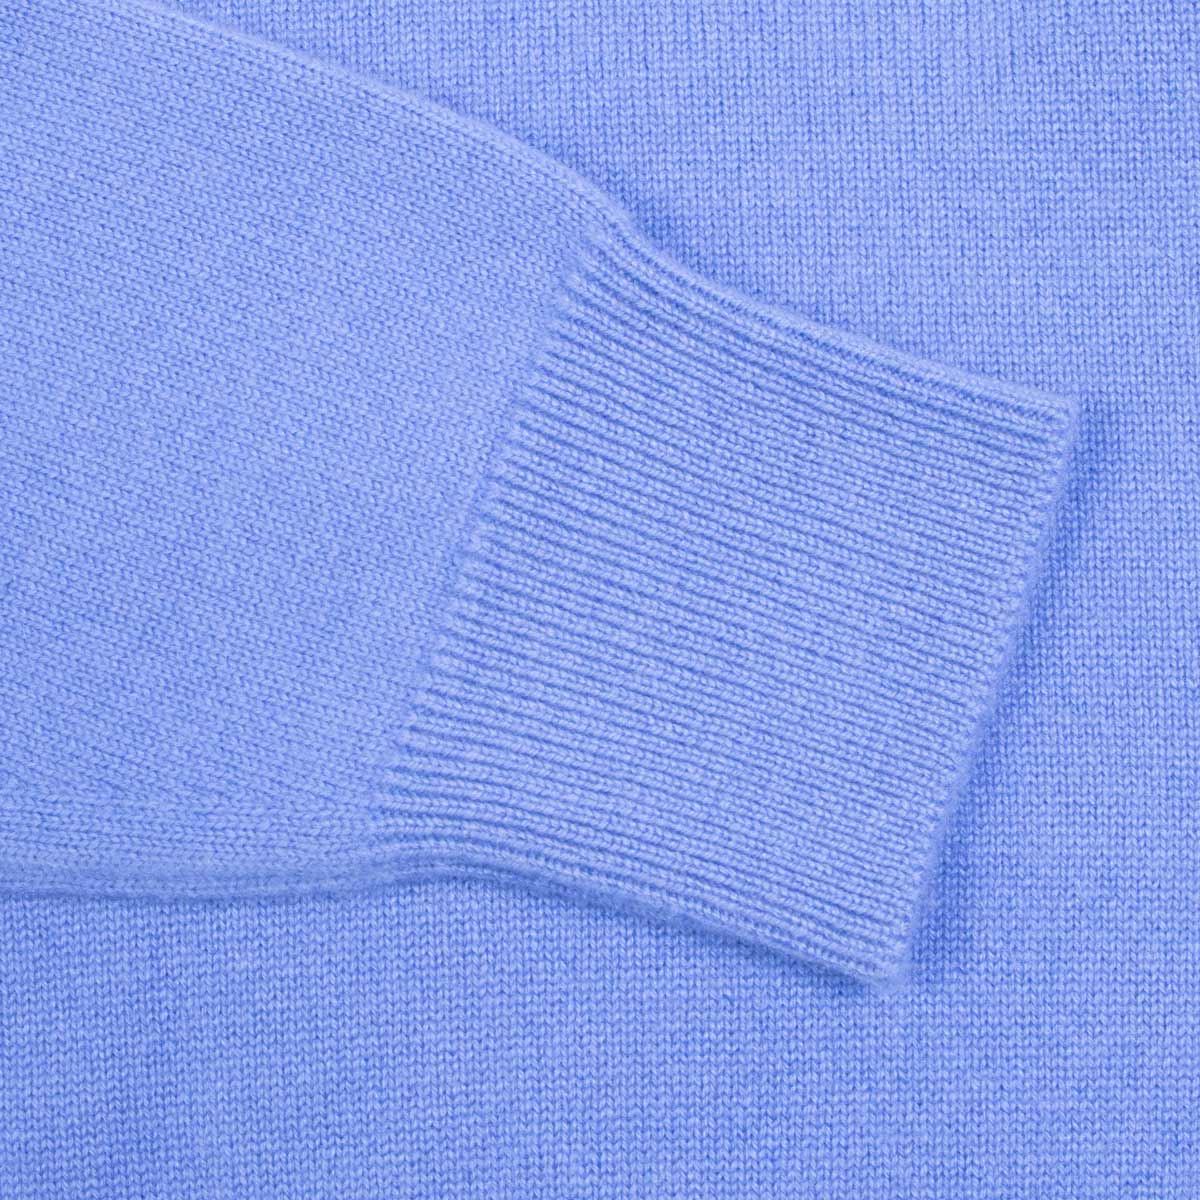 Isfahan Blue Balvenie 3 Button 4ply Cashmere Polo Sweater Robert Old